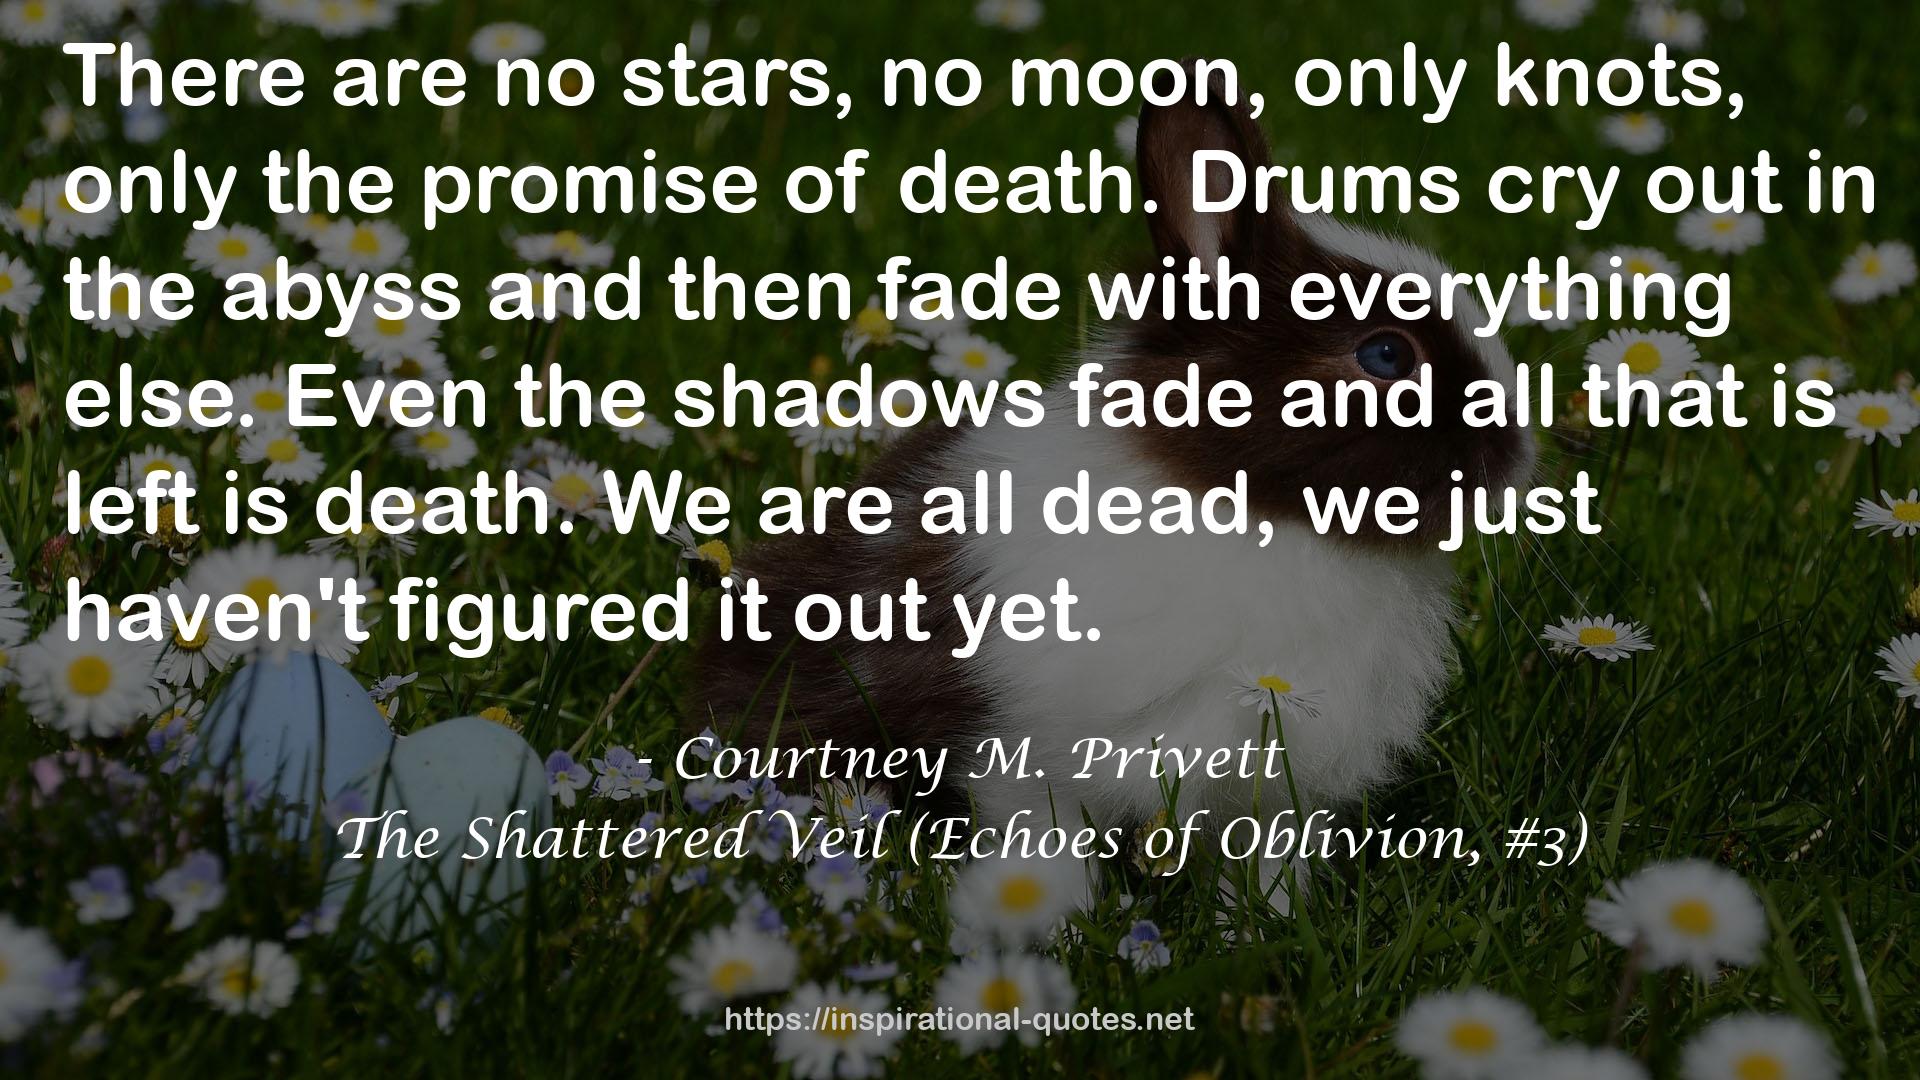 The Shattered Veil (Echoes of Oblivion, #3) QUOTES